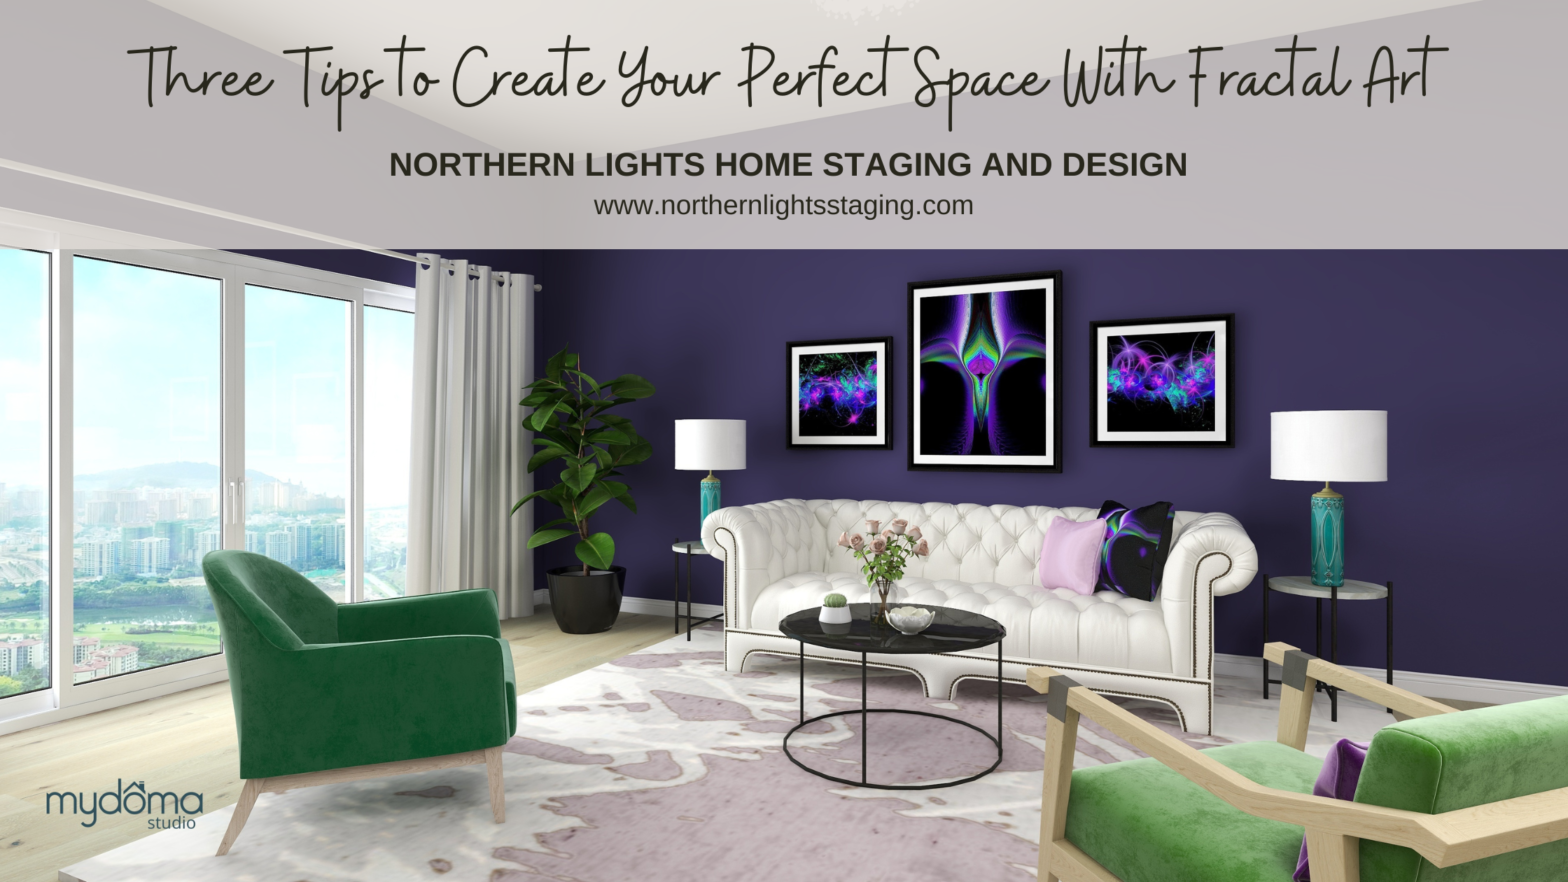 Three Tips to Create Your Perfect Space With Fractal Art